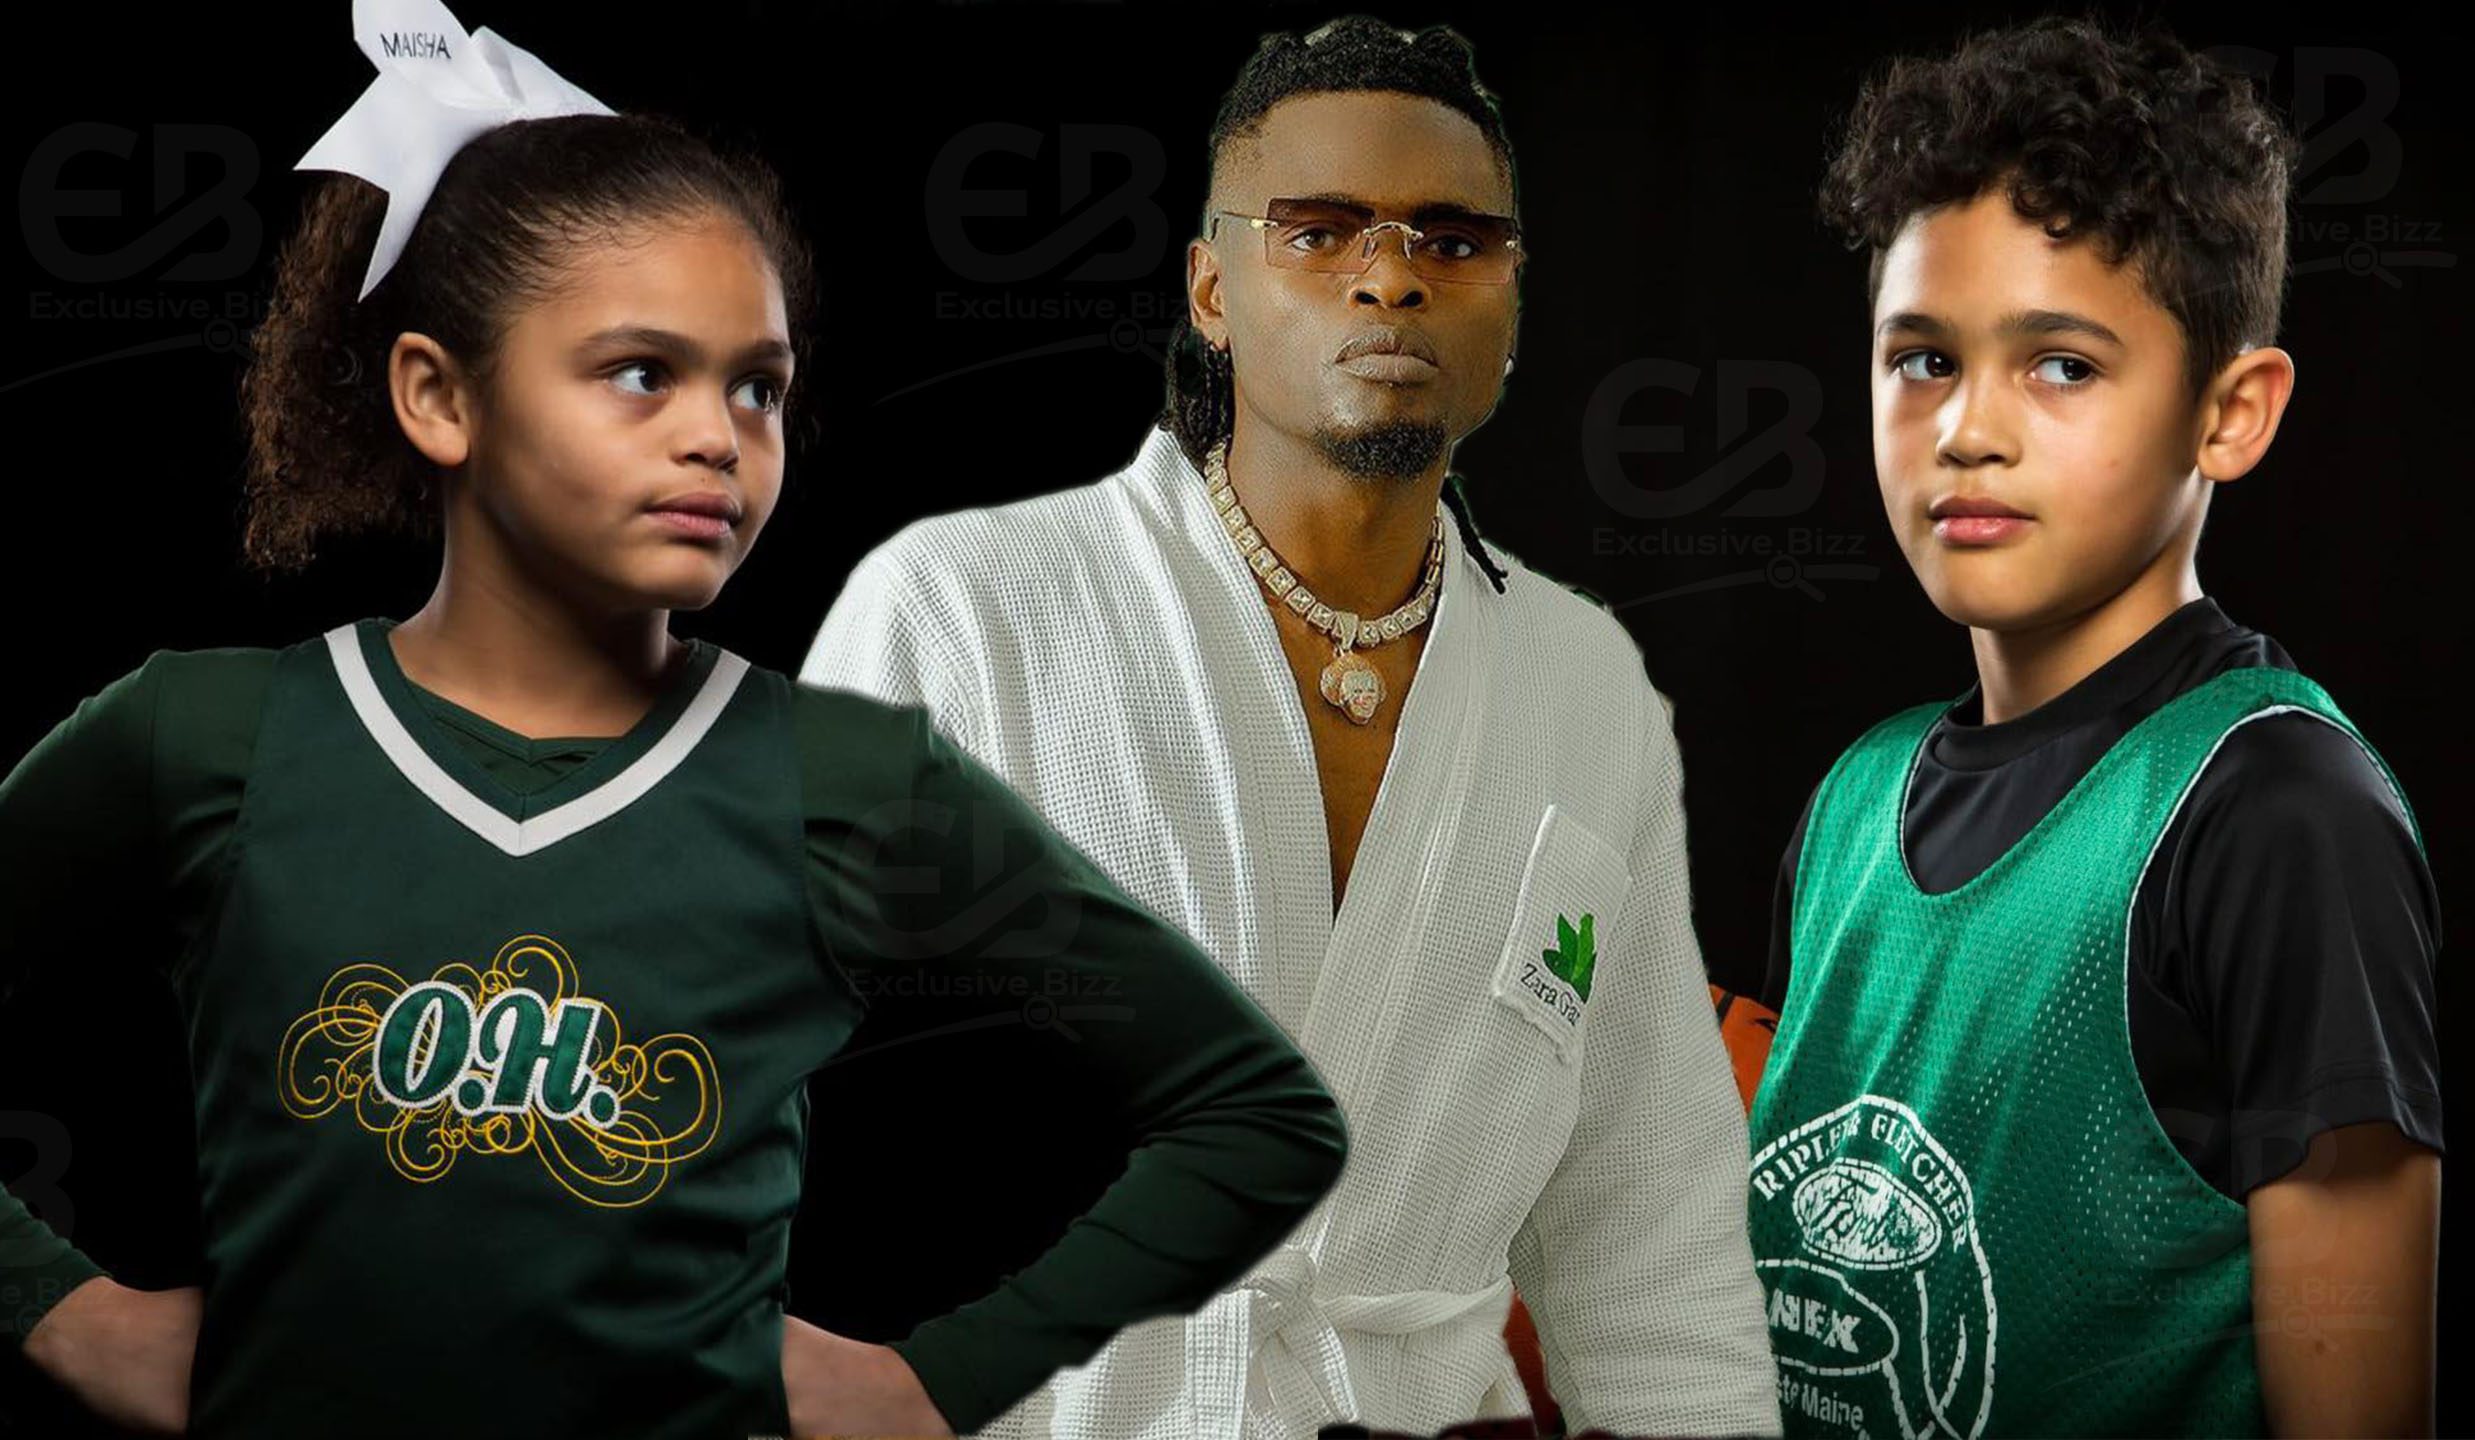 Pallaso and his kids